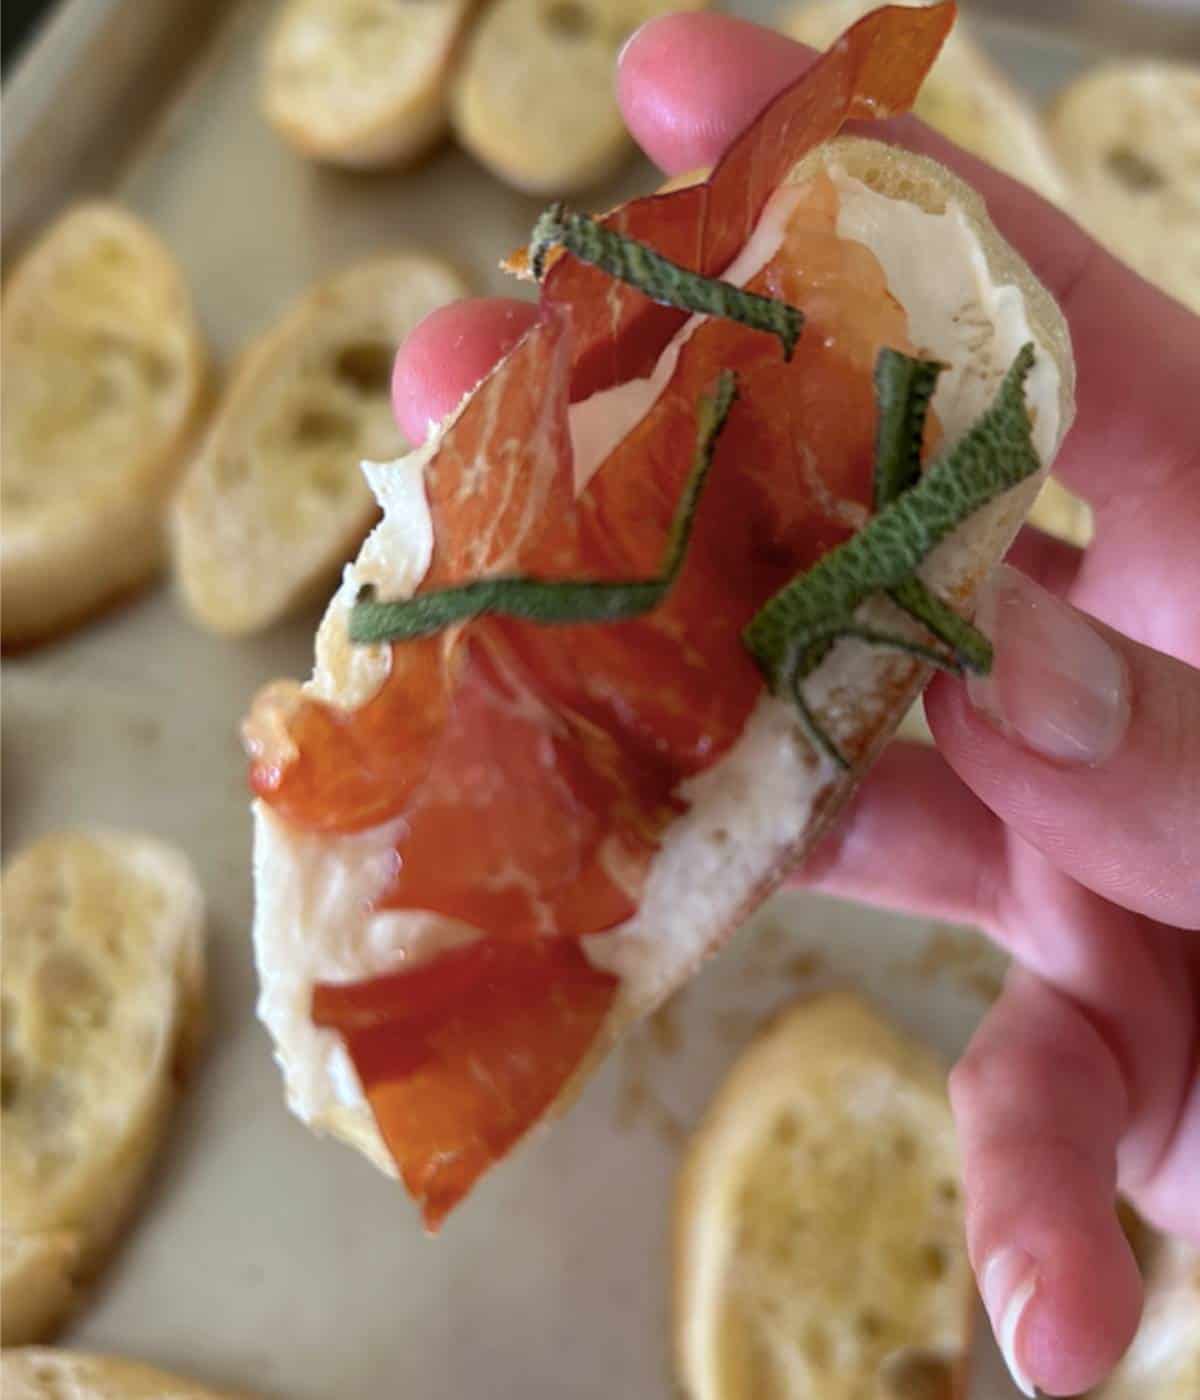 Hand holding crostini topped with goat cheese, prosciutto and sage.